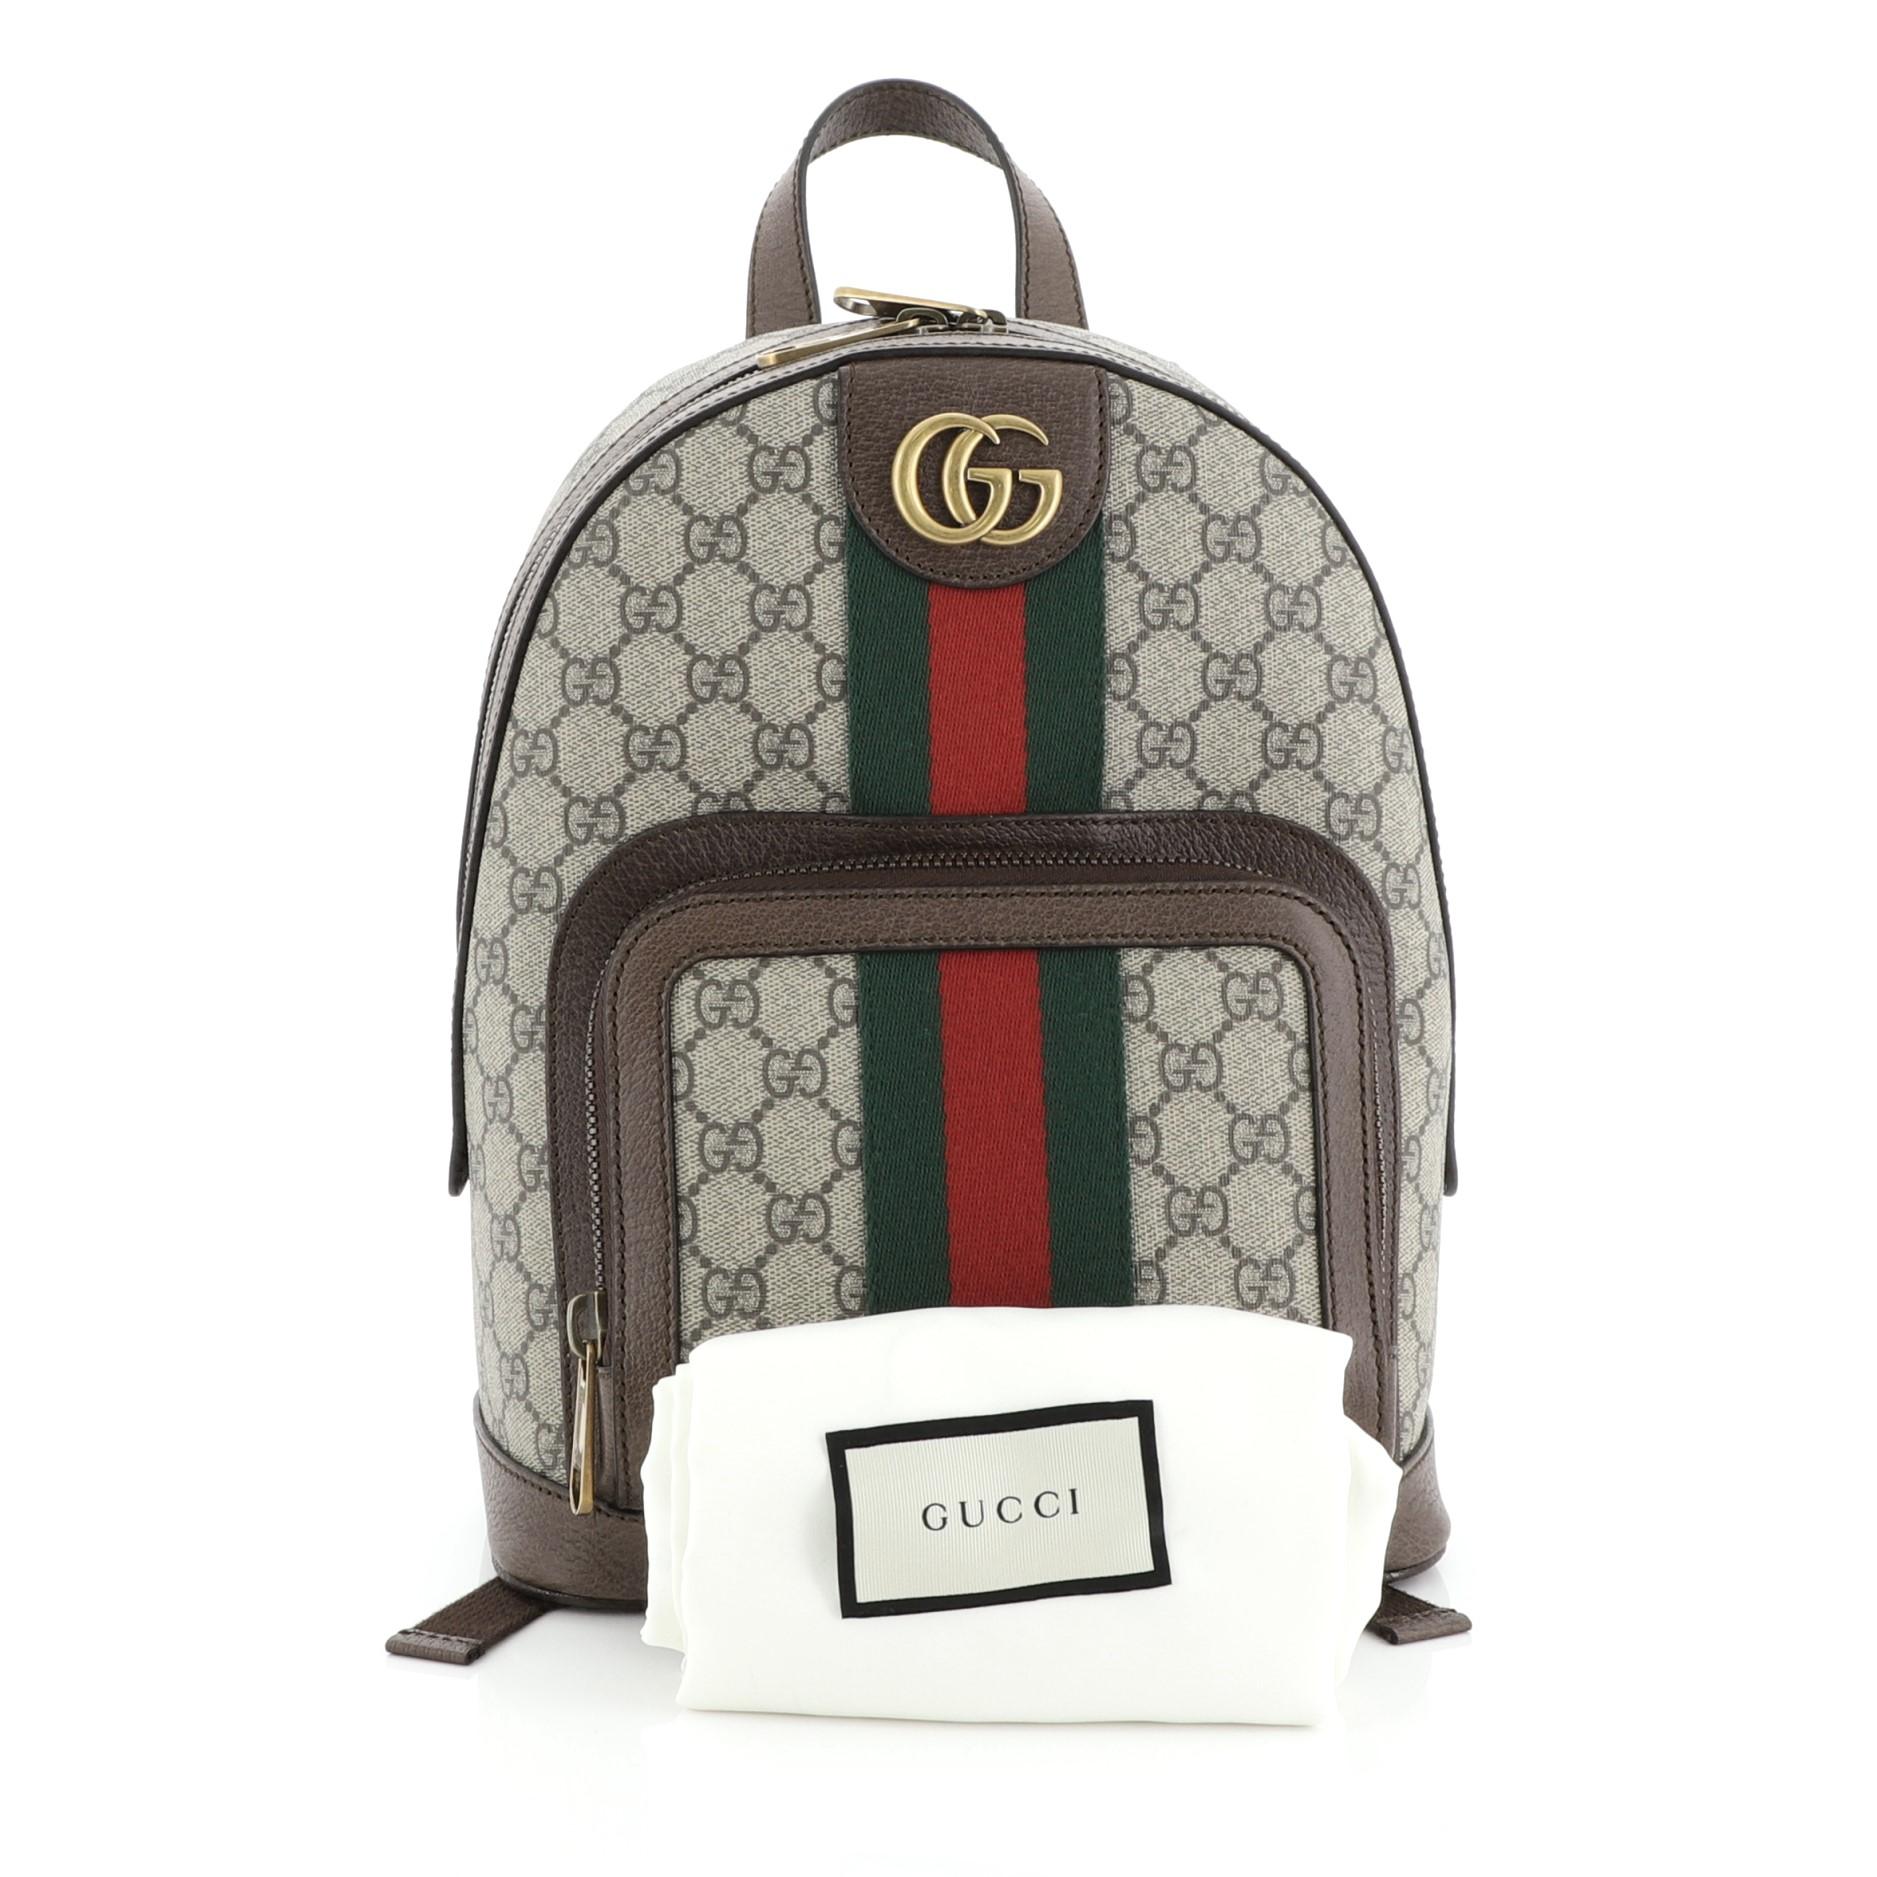 This Gucci Ophidia Backpack GG Coated Canvas Small, crafted in brown GG coated canvas, features dual shoulder straps, web strap detailing, exterior zip pocket and aged gold-tone hardware. Its zip closure opens to a neutral canvas interior.